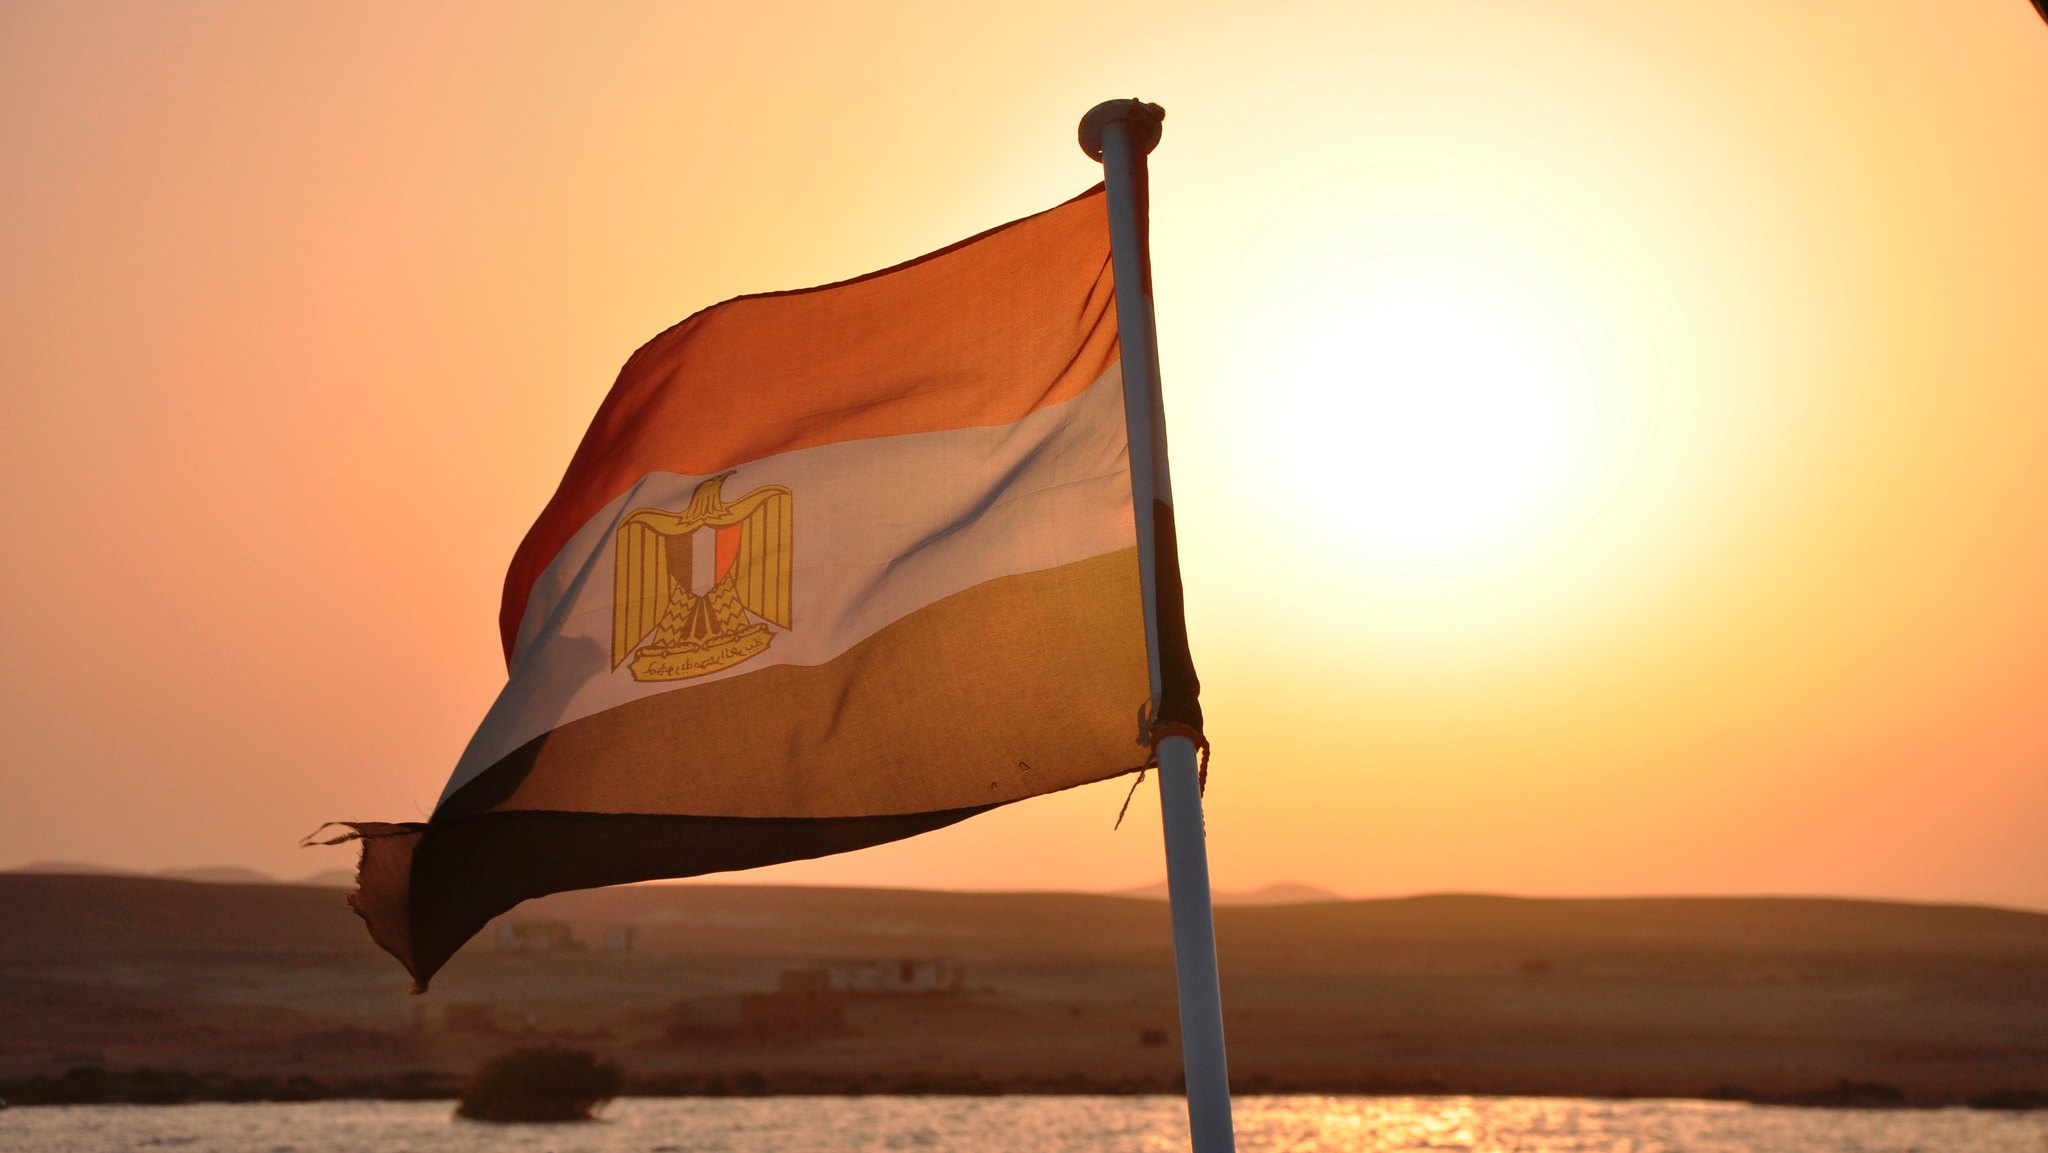 Orange Egypt Donates EGP 5 Million to Aid Families Dependent on Daily Incomes During COVID-19 Crisis